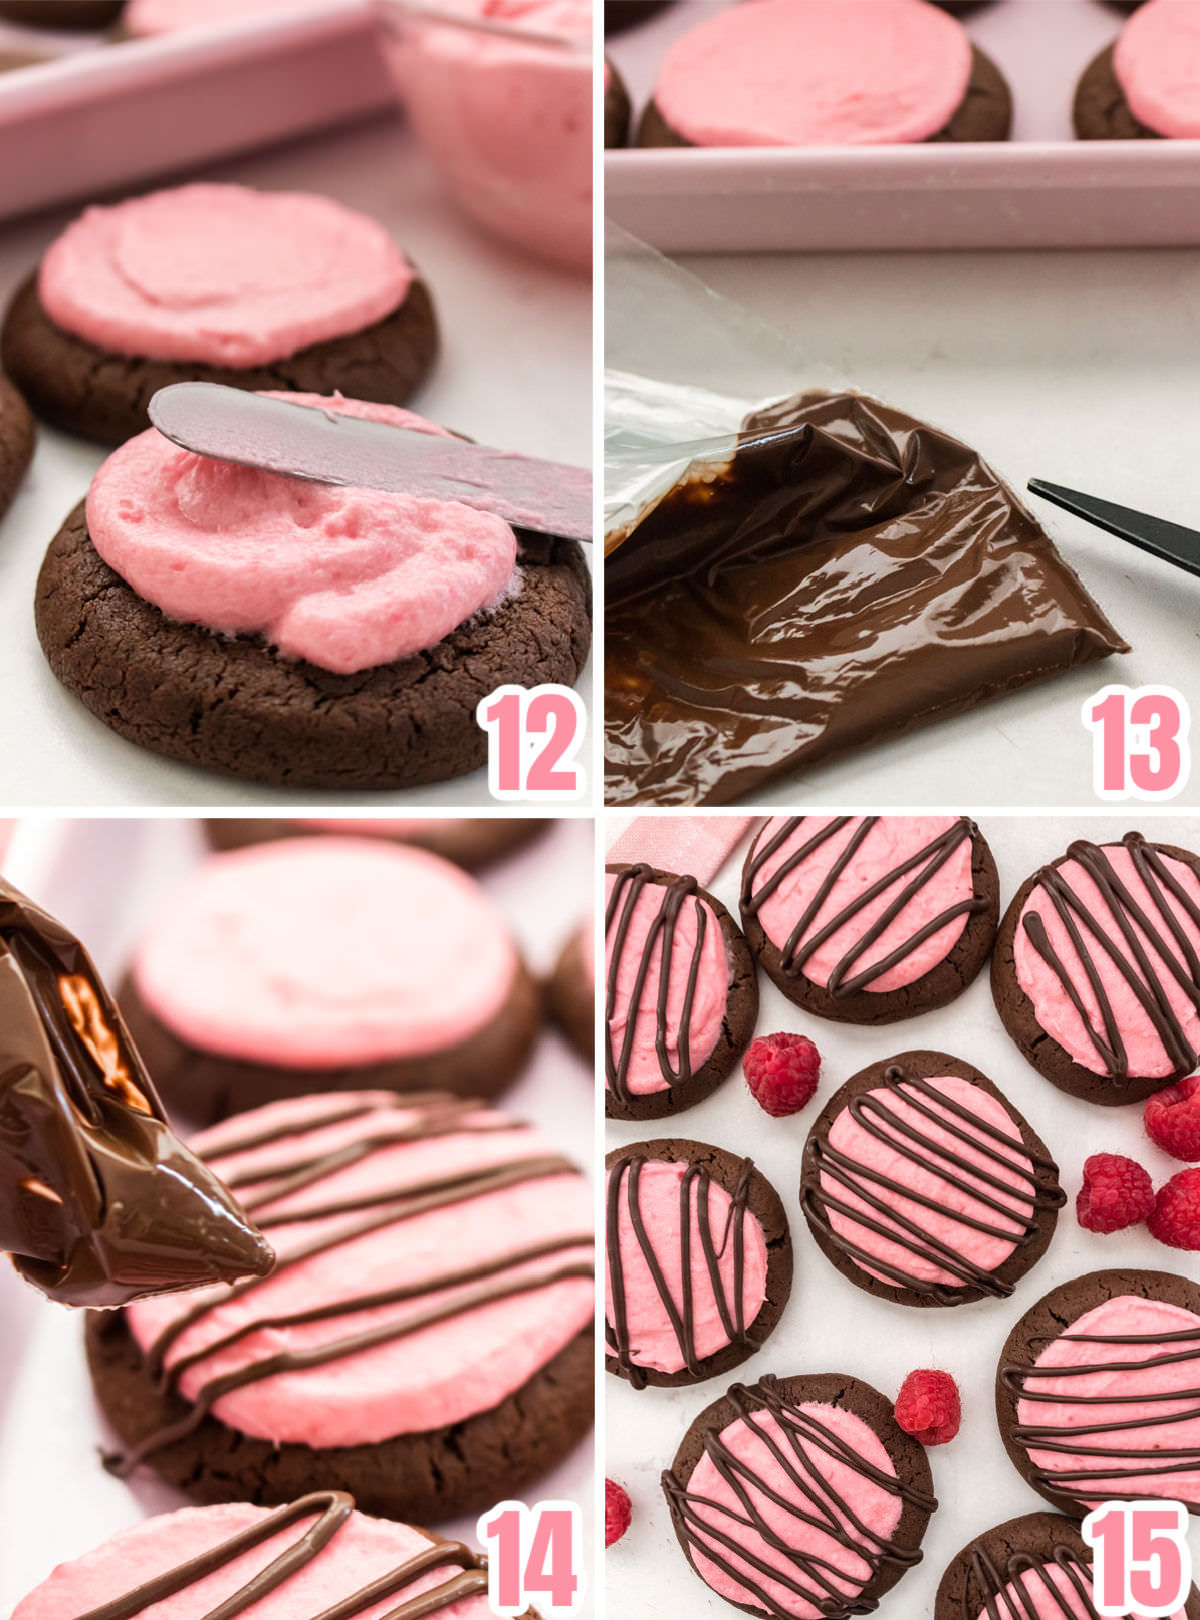 Collage image showing the steps required to frost the chocolate cookies with homemade Raspberry Frosting.